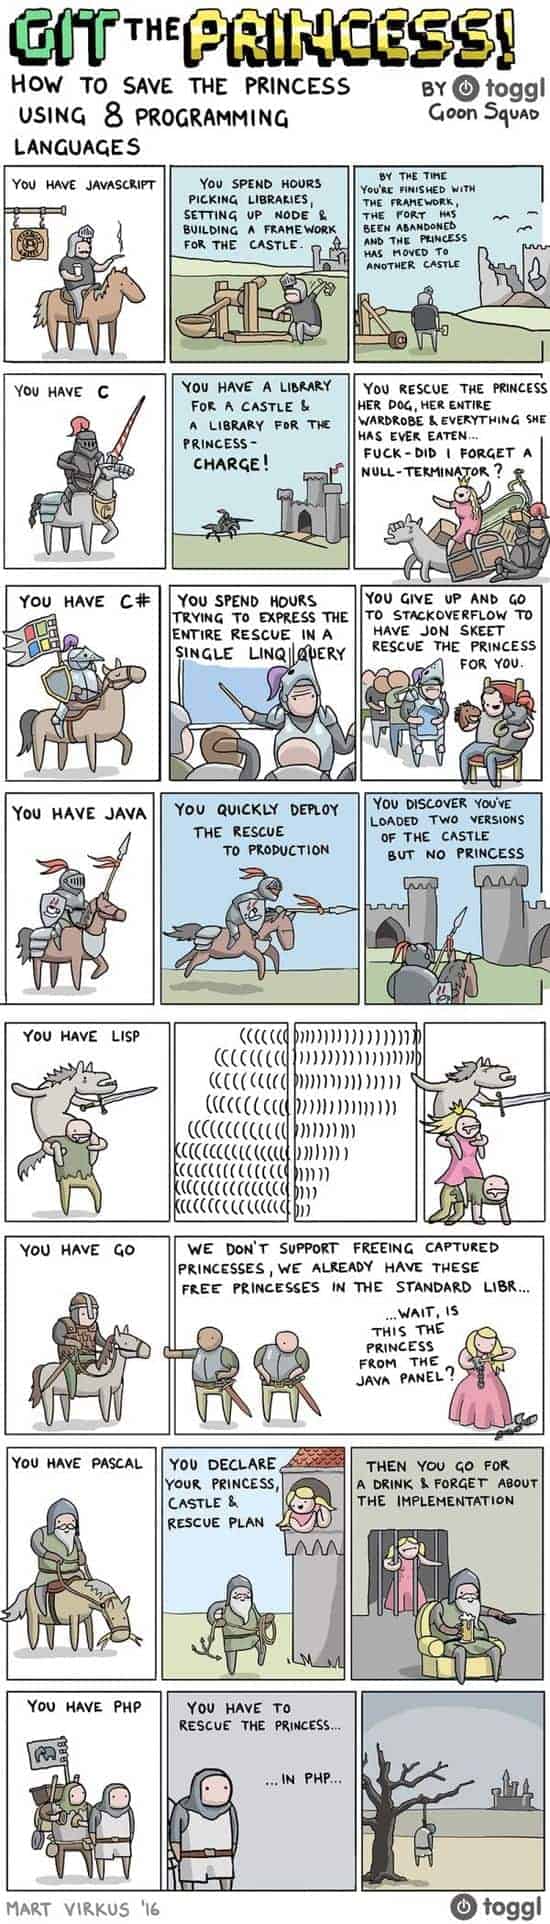 How to save the princess using programming languages